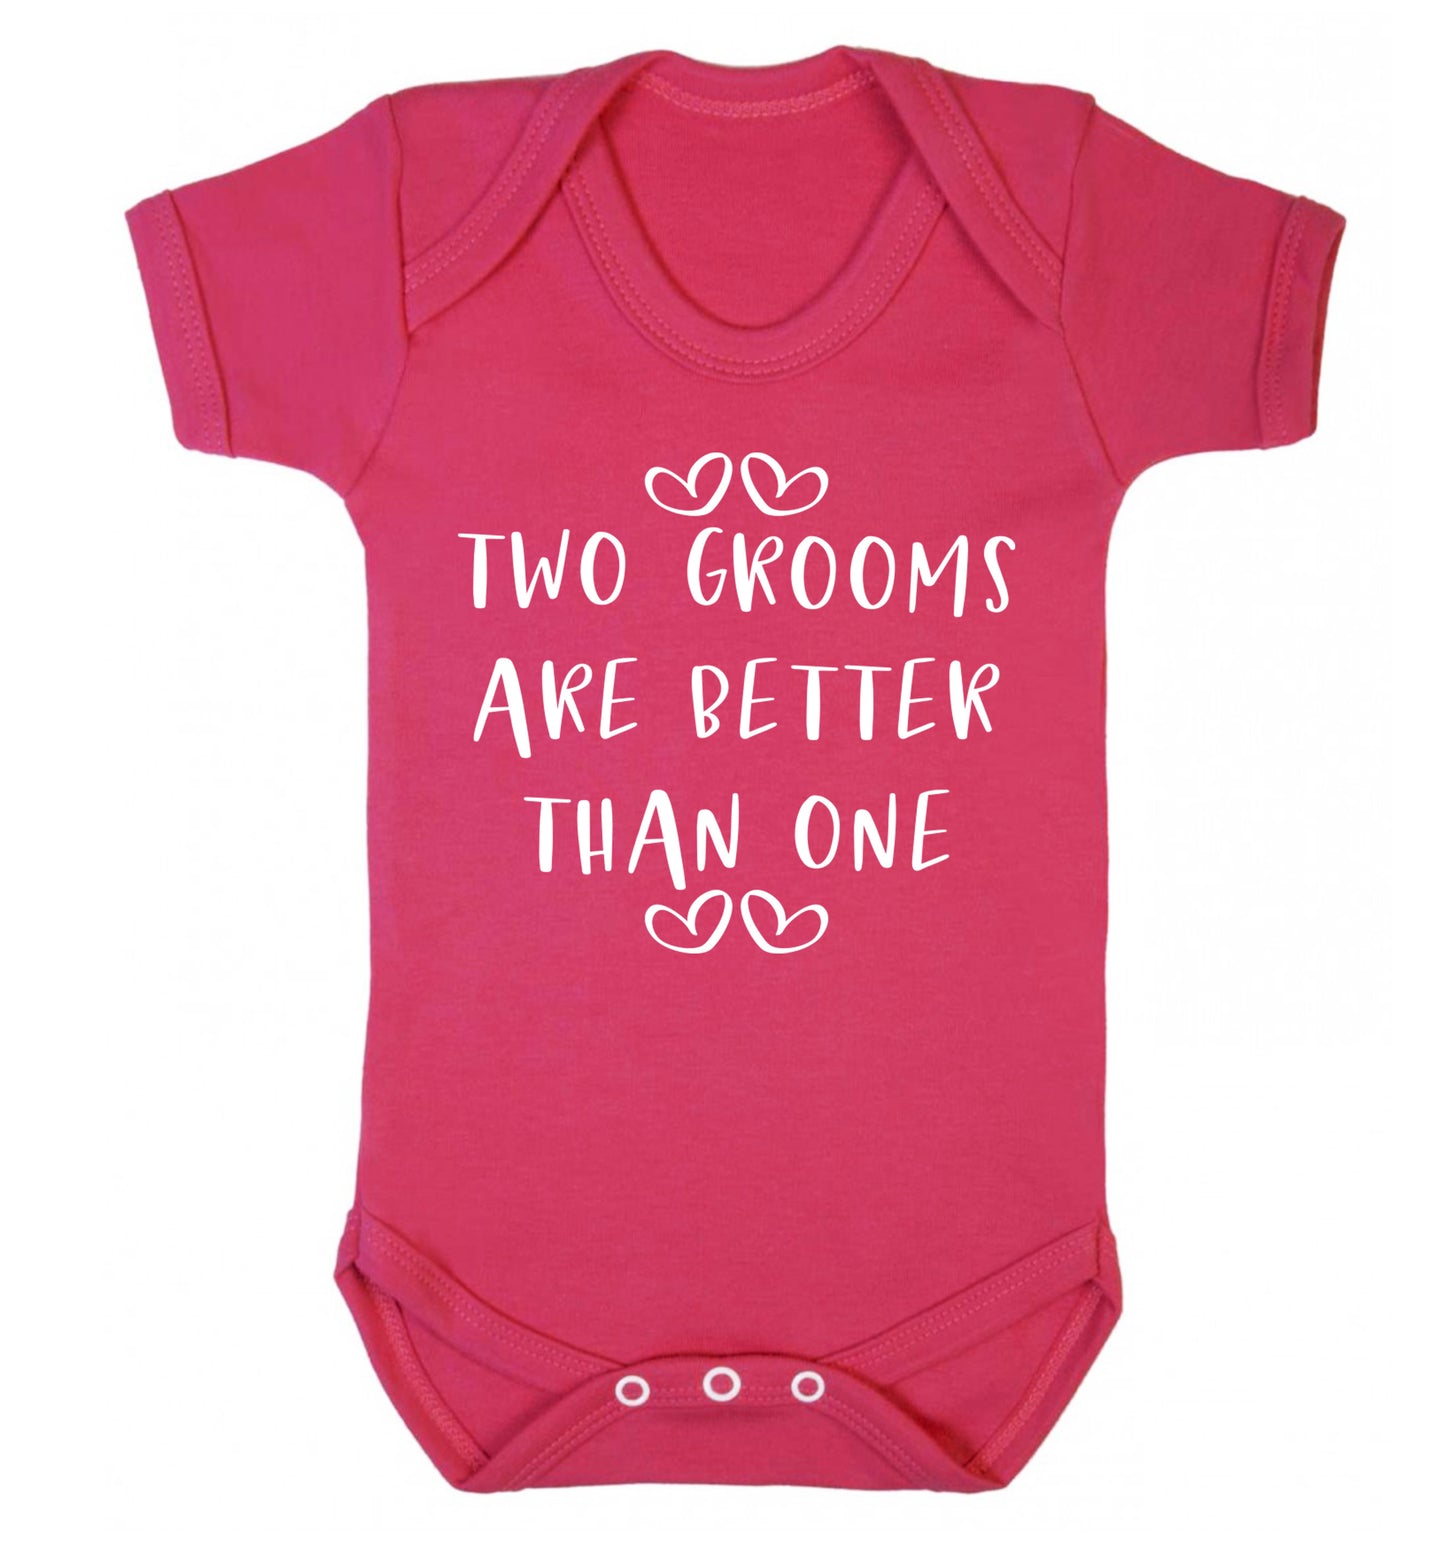 Two grooms are better than one baby vest dark pink 18-24 months